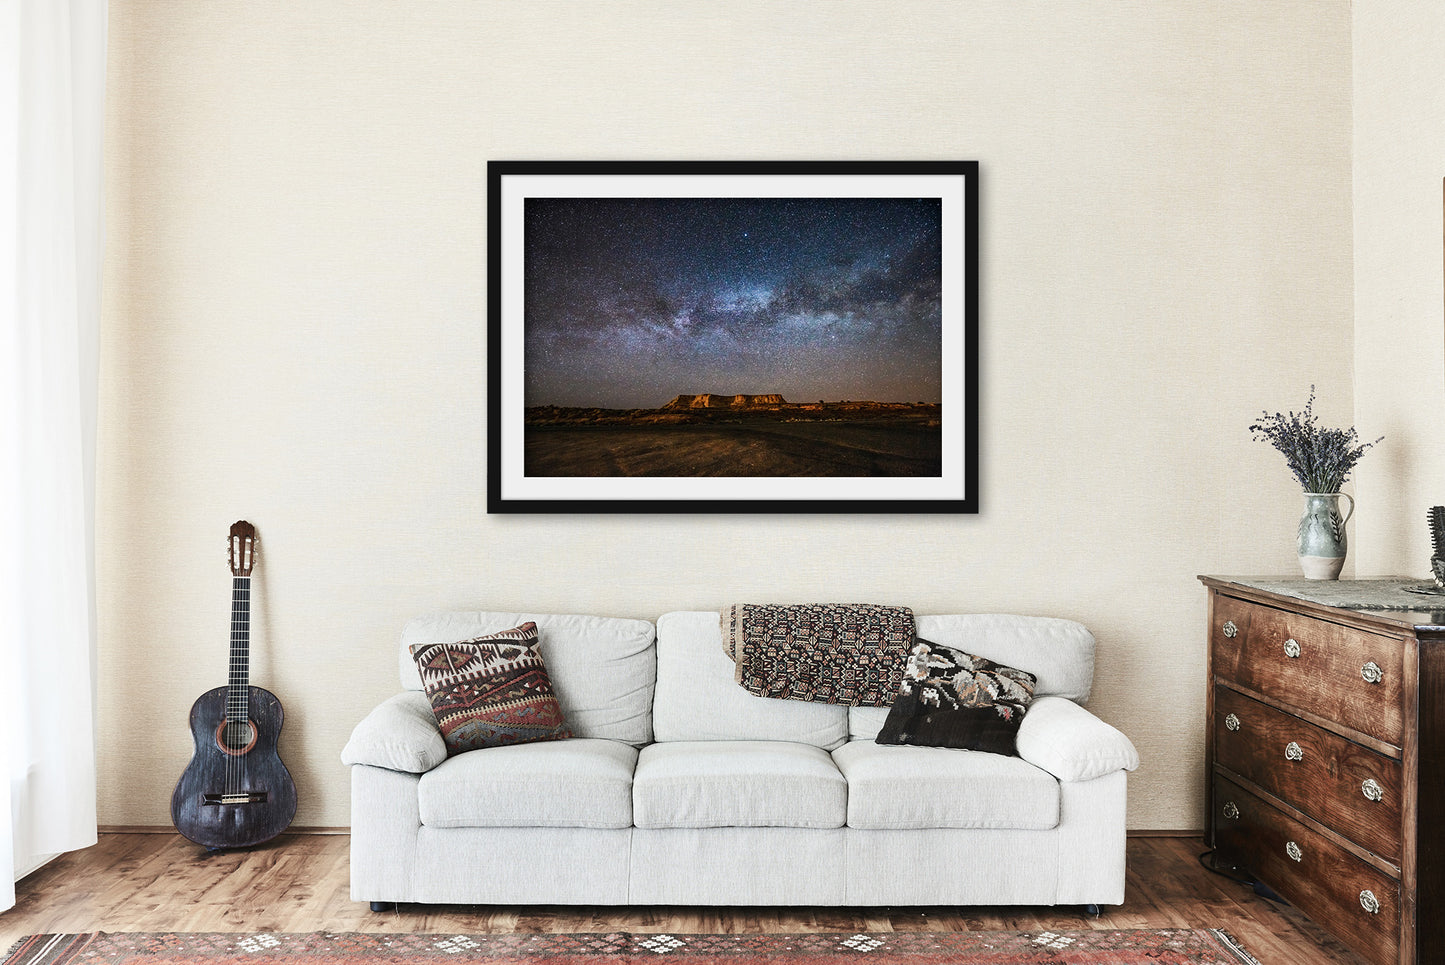 Framed Art Print - Celestial Picture of Milky Way Over Mesa on Starry Night in Arizona Desert - Ready to Hang Southwestern Photo Wall Art